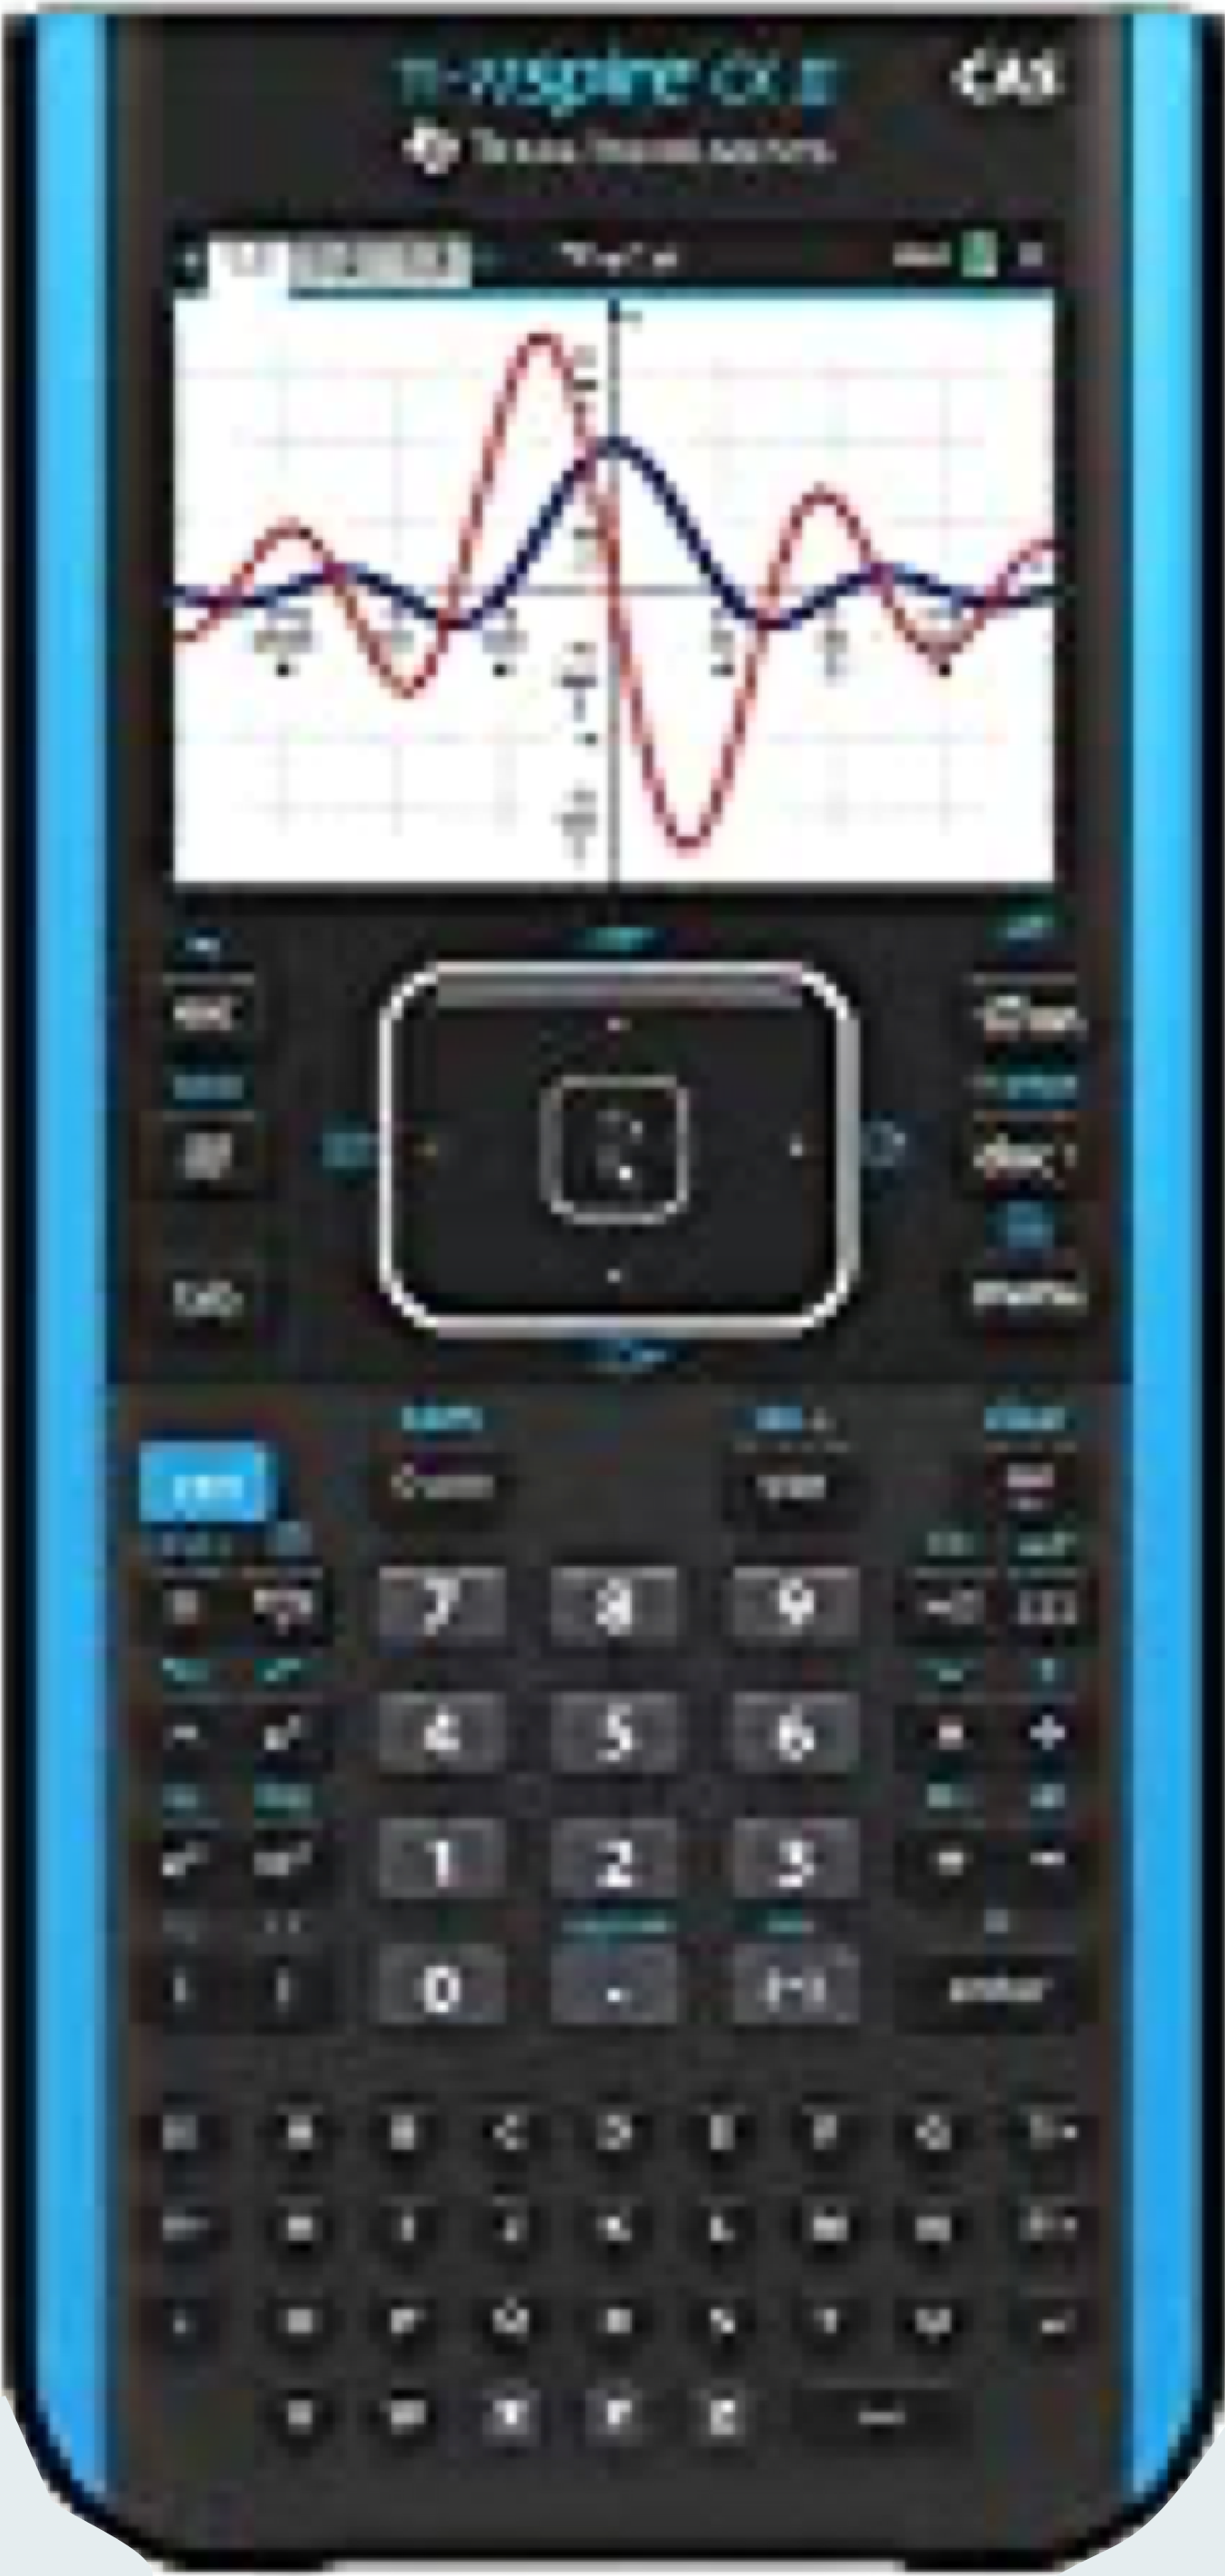 TI-NSpire: The Most Powerful Calculator